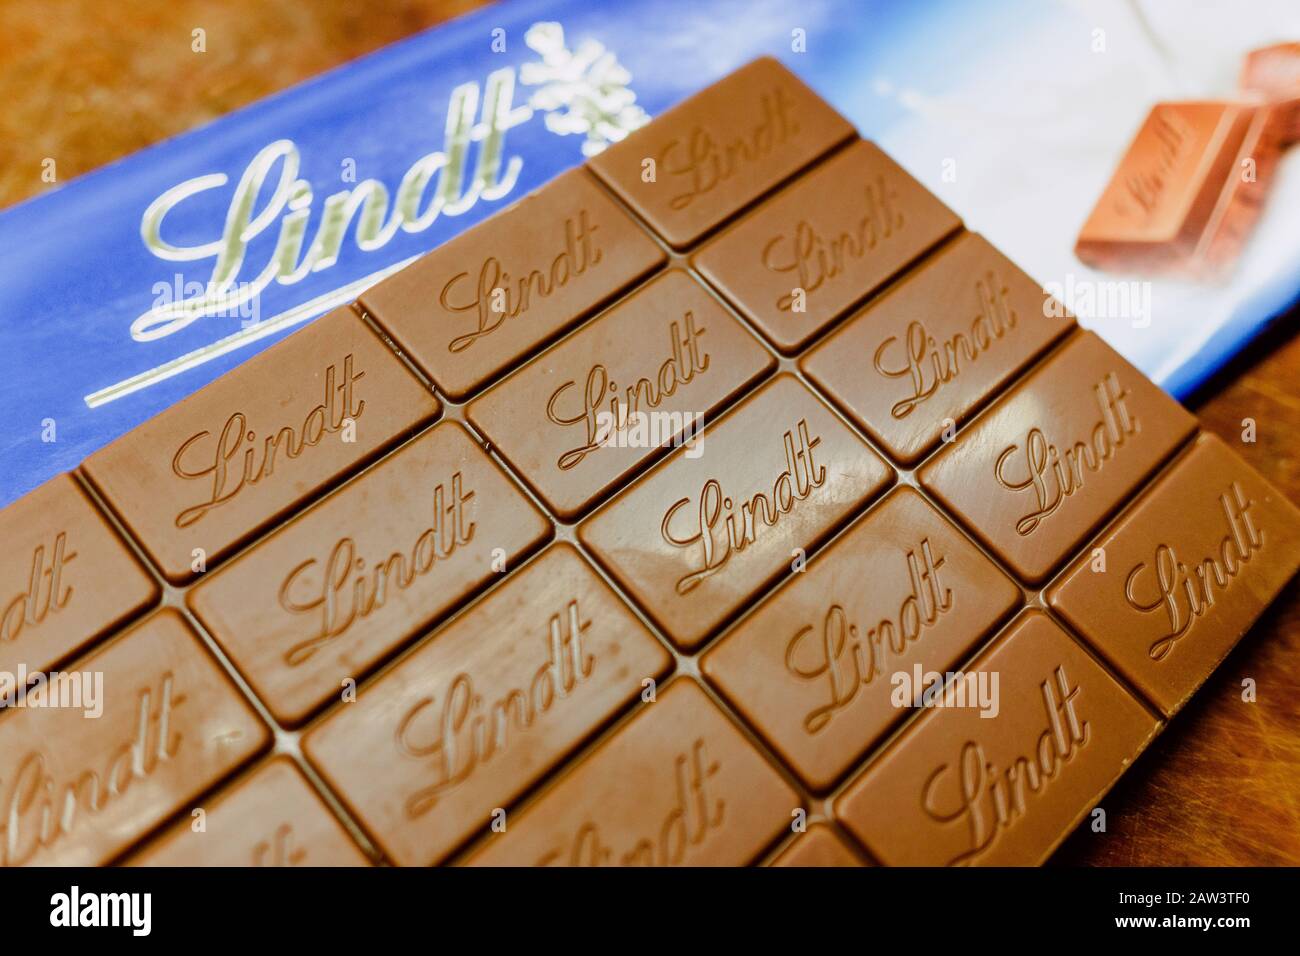 Valencia, Spain - February 5, 2020: Lindt Swiss brand chocolate tablet. Stock Photo